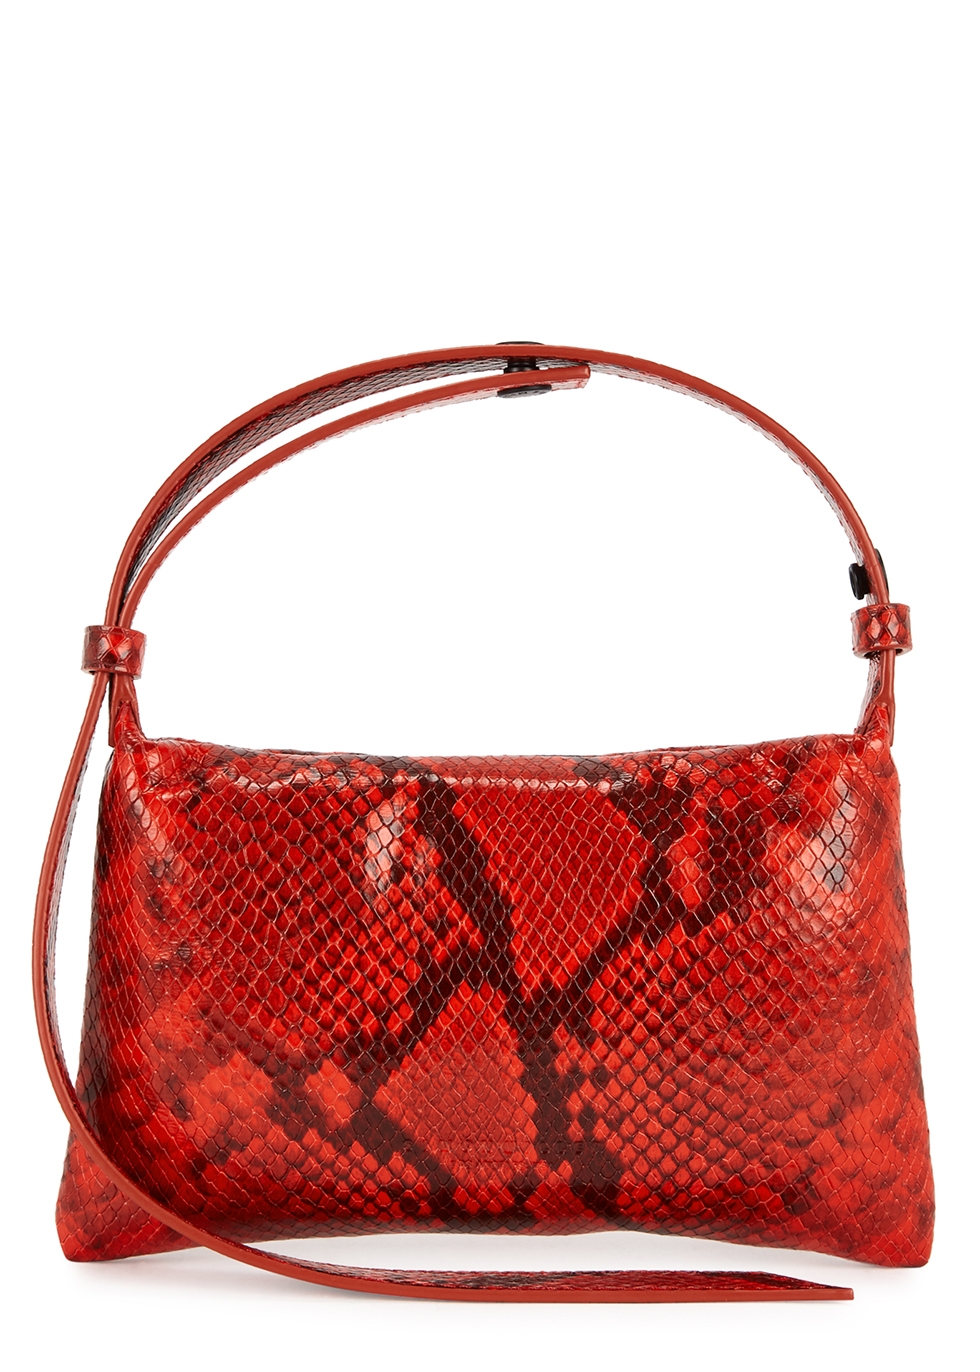 Puffin mini snake-effect leather top handle bag